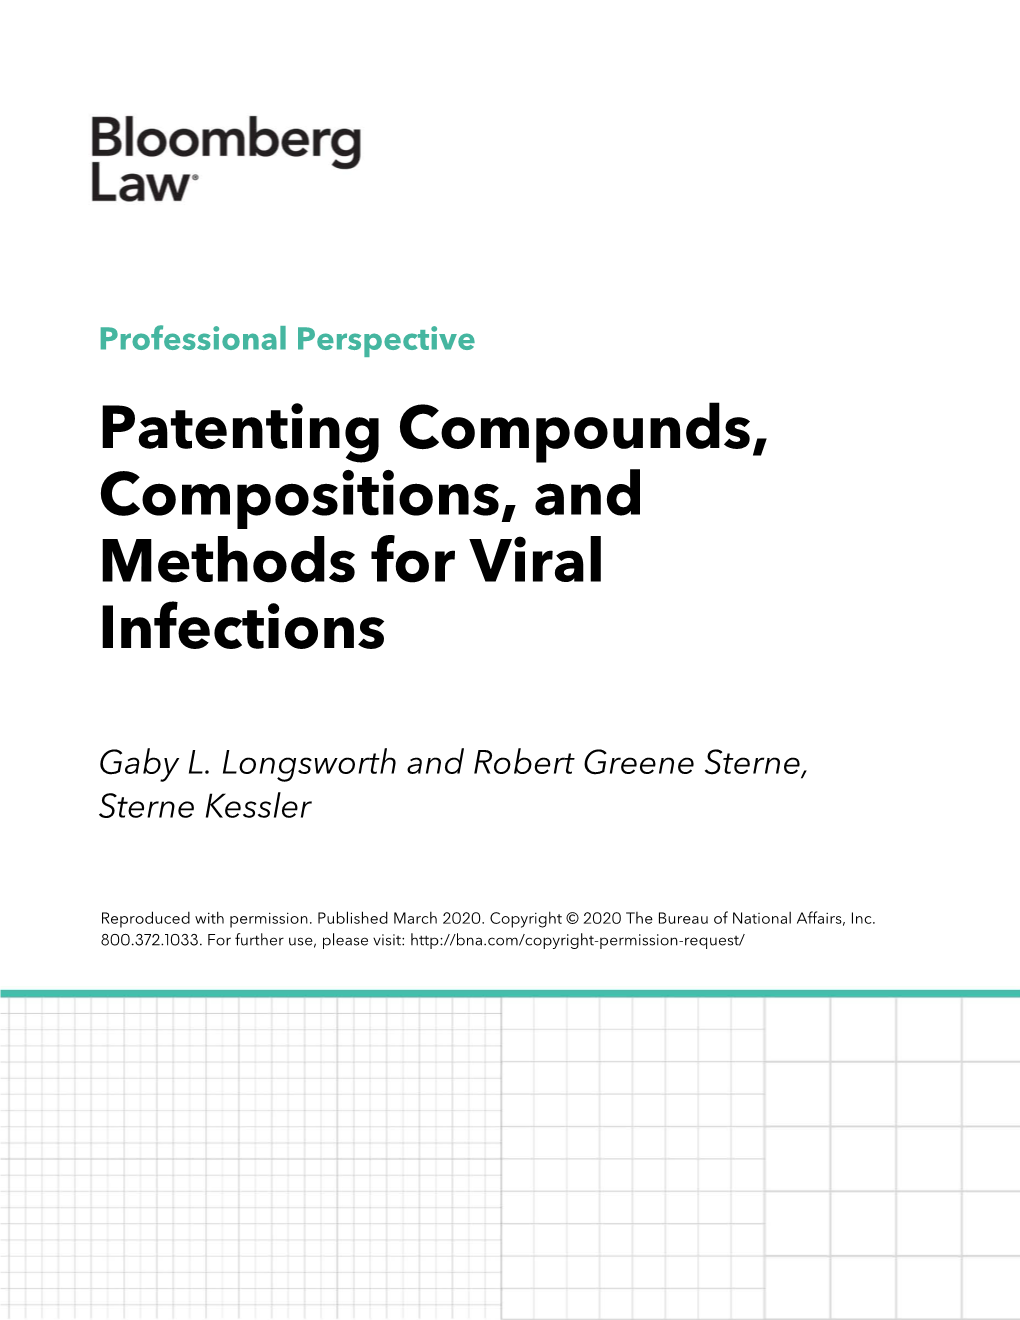 Patenting Compounds, Compositions, and Methods for Viral Infections